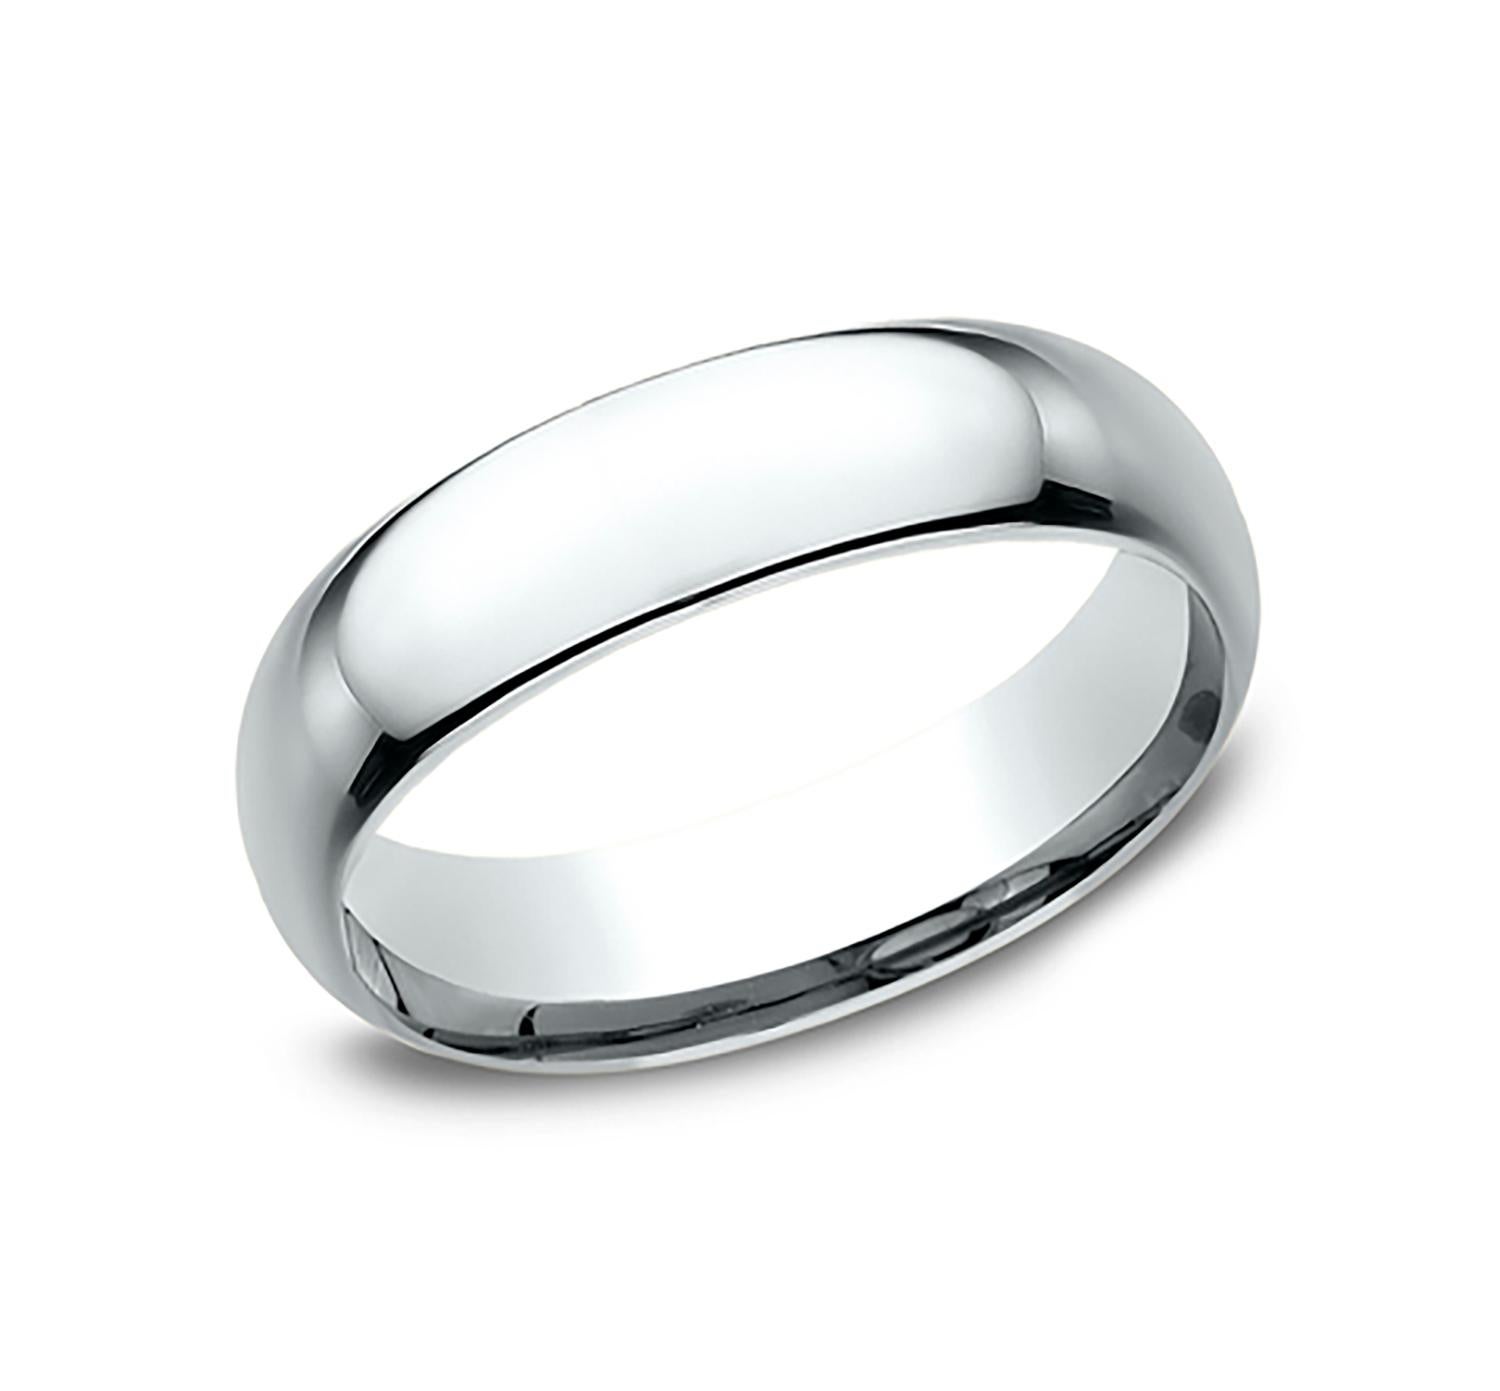 Benchmark wedding band in polished platinum finish. Width 6mm, high dome comfort fit. Custom engraving and finishing available. Size 9 US and resizable upon request. Available in 1/4, 1/2, and 3/4 sizes, for more information please message us on